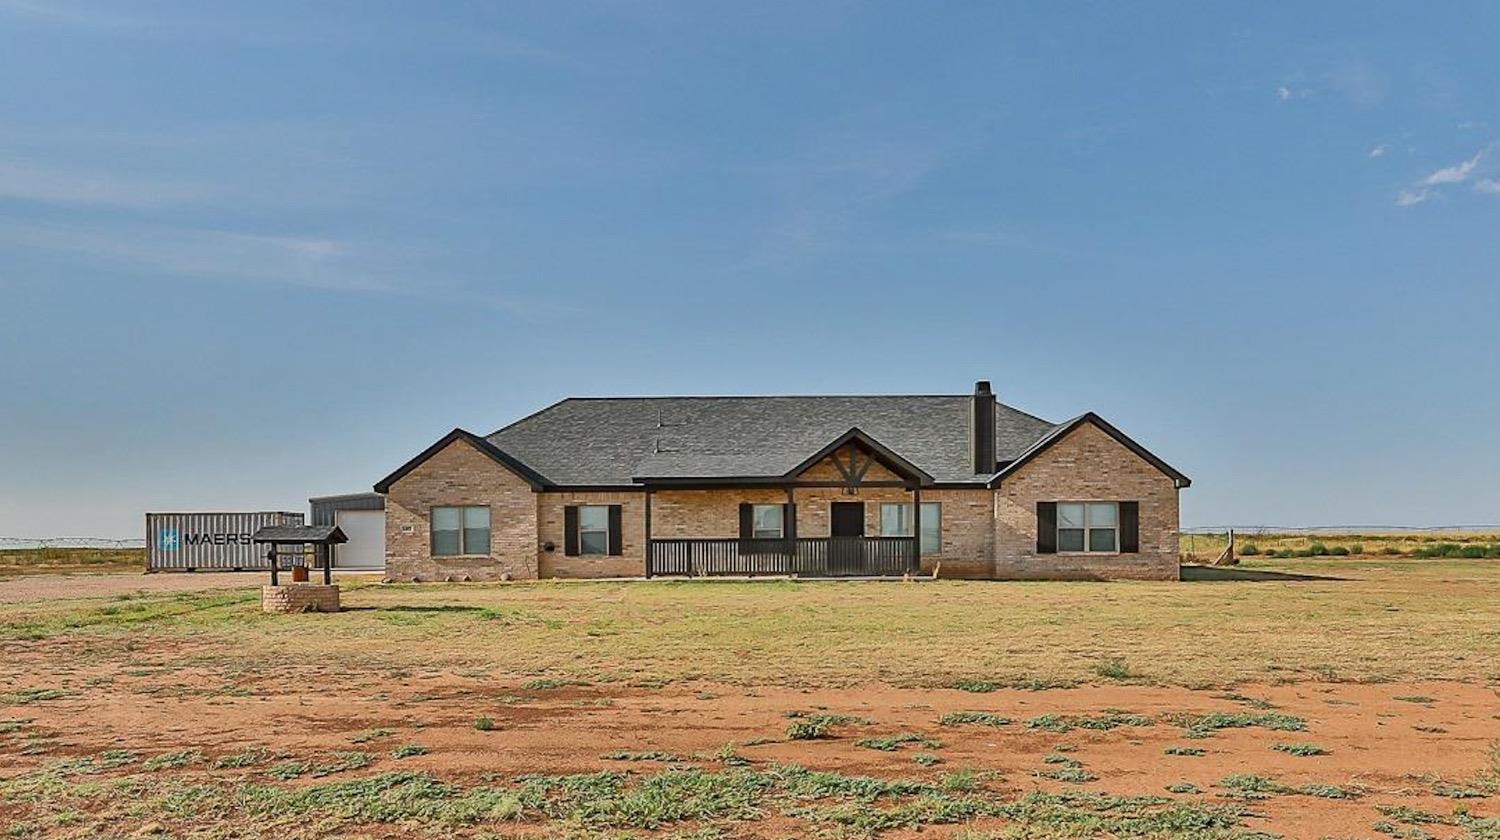 Now this is a steal of a deal! This stunning property offers a 4-bedroom, 3-bathroom ranch-style home with a 24 x 30 barn on 10.02 acres in the highly desired New Home School District. The open concept layout connects the living areas seamlessly. The kitchen features quartz countertops, a large serving island, stainless steel appliances, and a walk-in pantry. The living room boasts a special ceiling with center wood beam and corner fireplace. The master ensuite is isolated with double lavatories, a soaking tub, separate shower, and a wrap-around closet with built-ins. The laundry room is equipped with a sink, mudbench, and generous storage. A charming addition of a wood gate adorns the garage door. As you step into the backyard, you'll find extended concrete and a blank canvas, ready for your dream home to come to life.